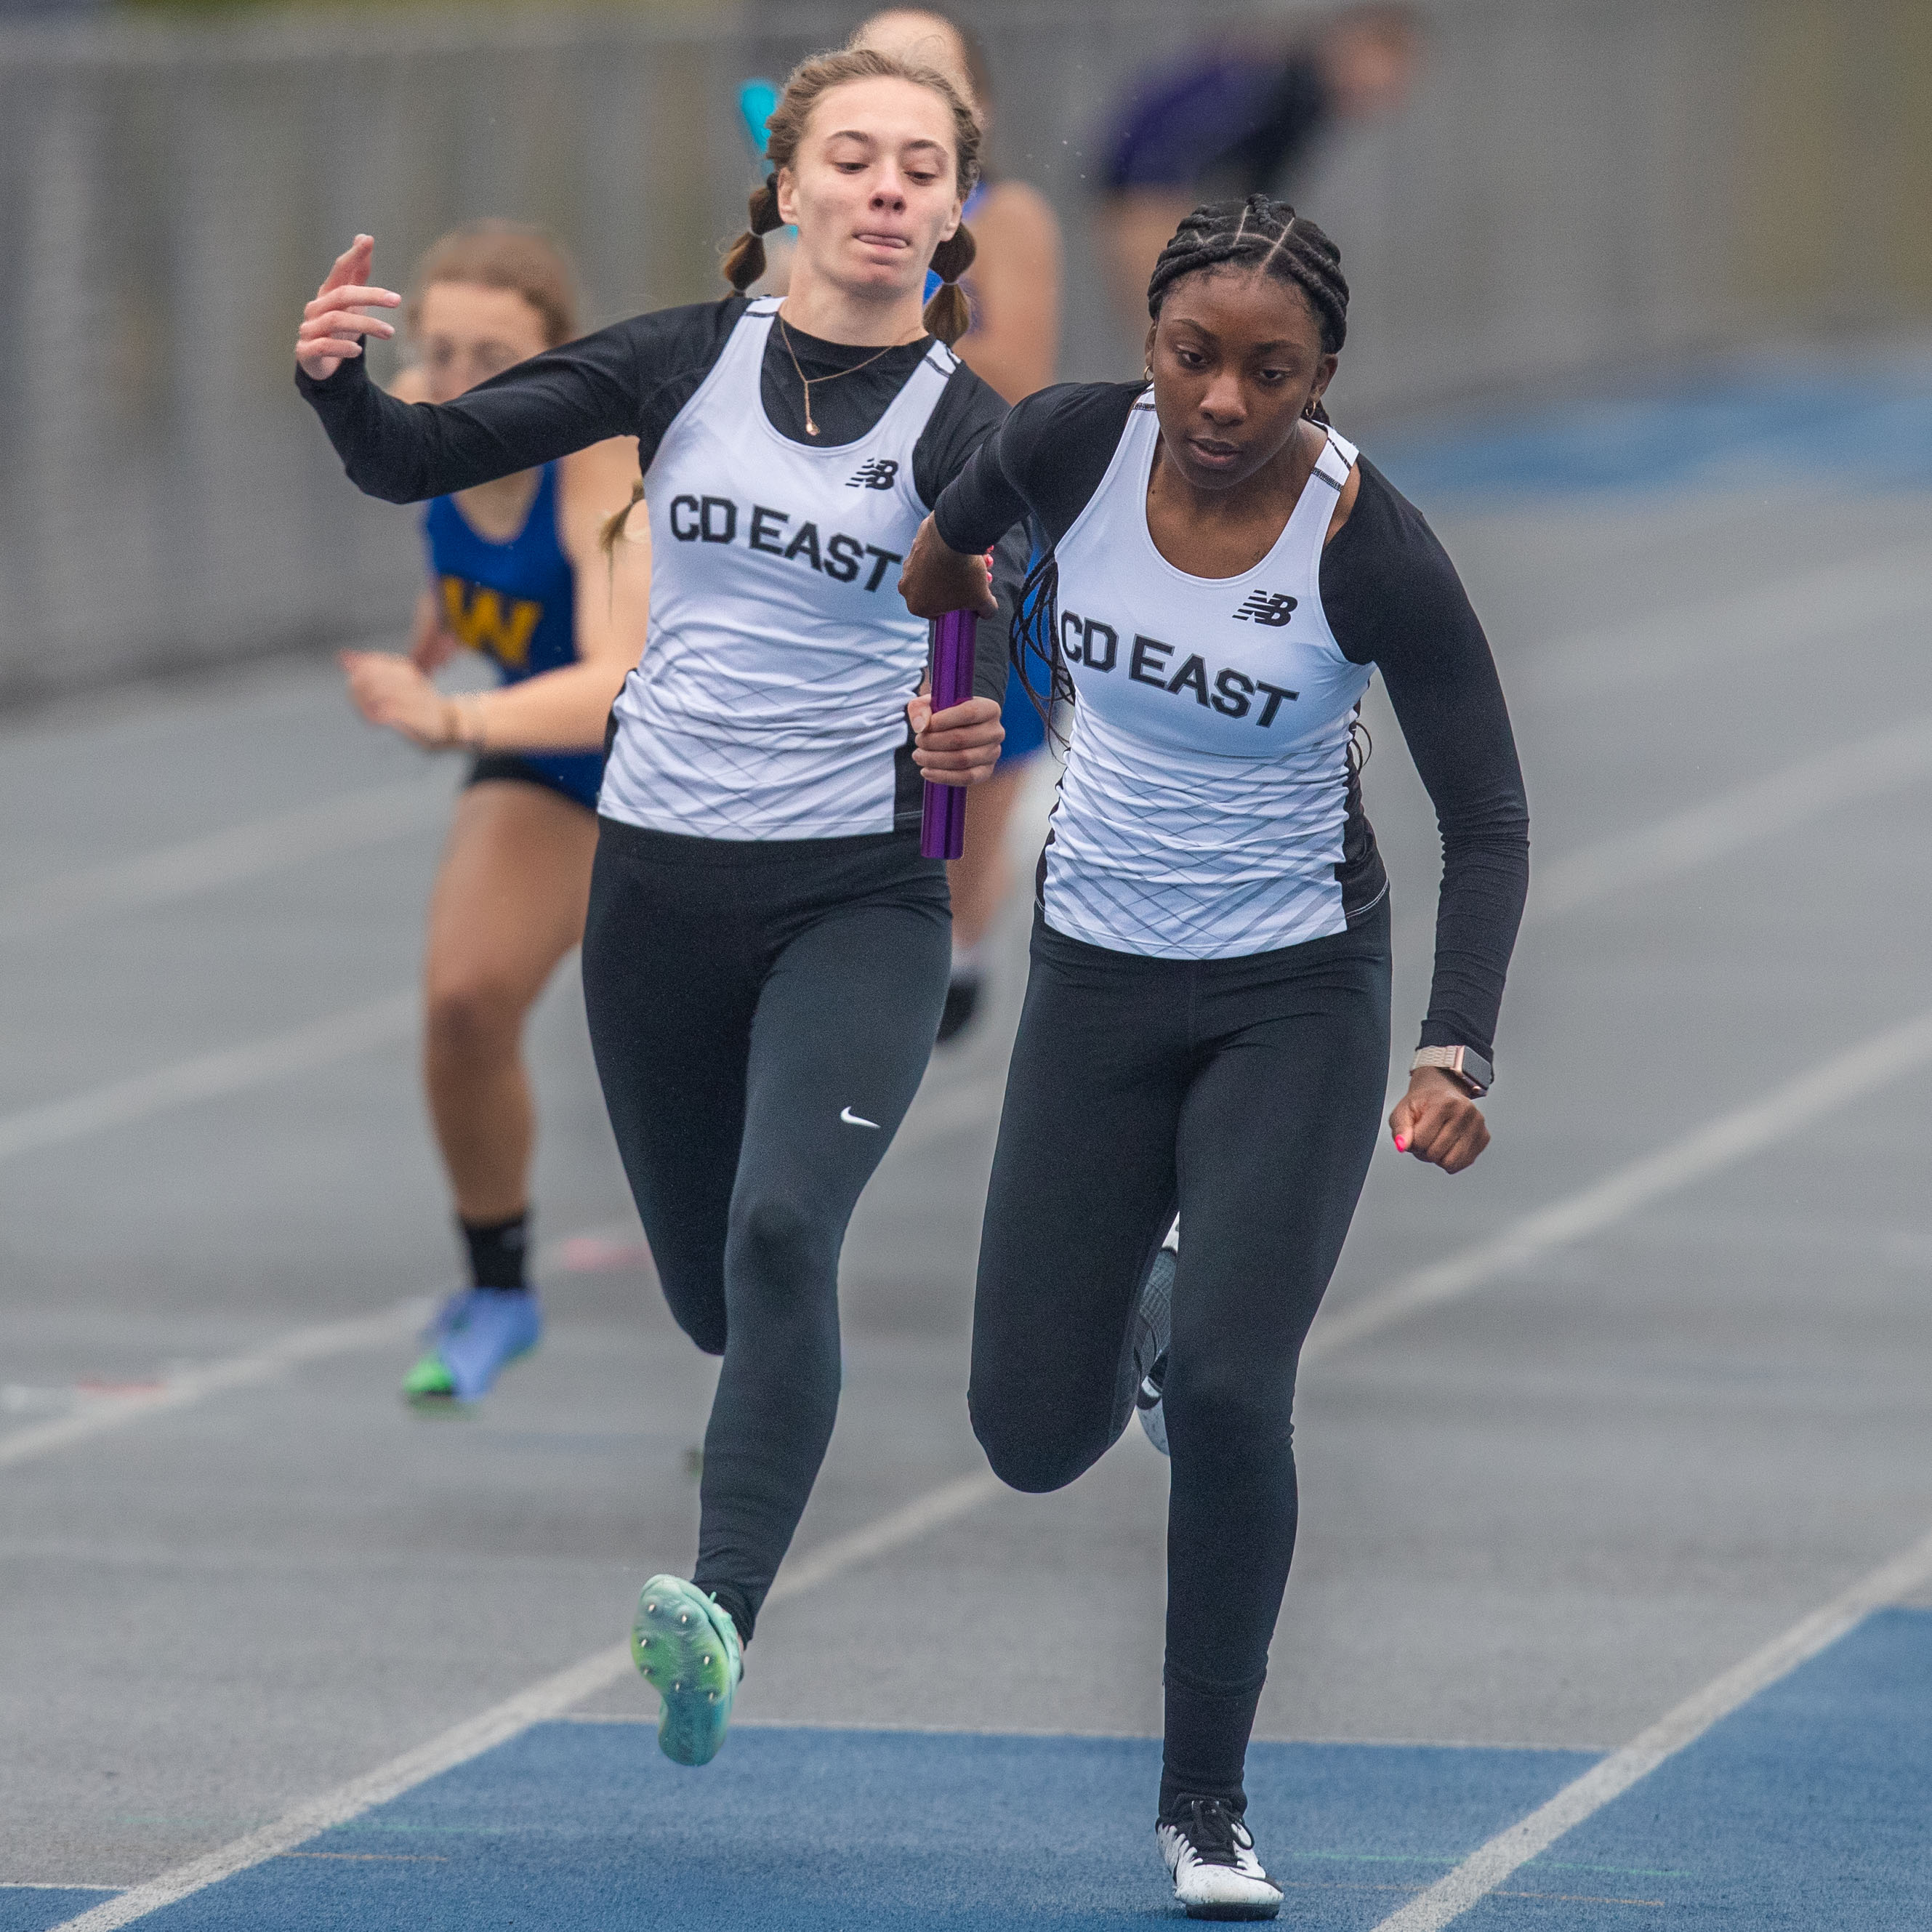 Central Dauphin East runners Livingston and Thomas exchange the baton as they win the 4 x 100 meter relay at the 2023 Tim Cook Memorial Invitational track & field meet at Chambersburg, Pa., Mar. 25, 2023.Mark Pynes | pennlive.com